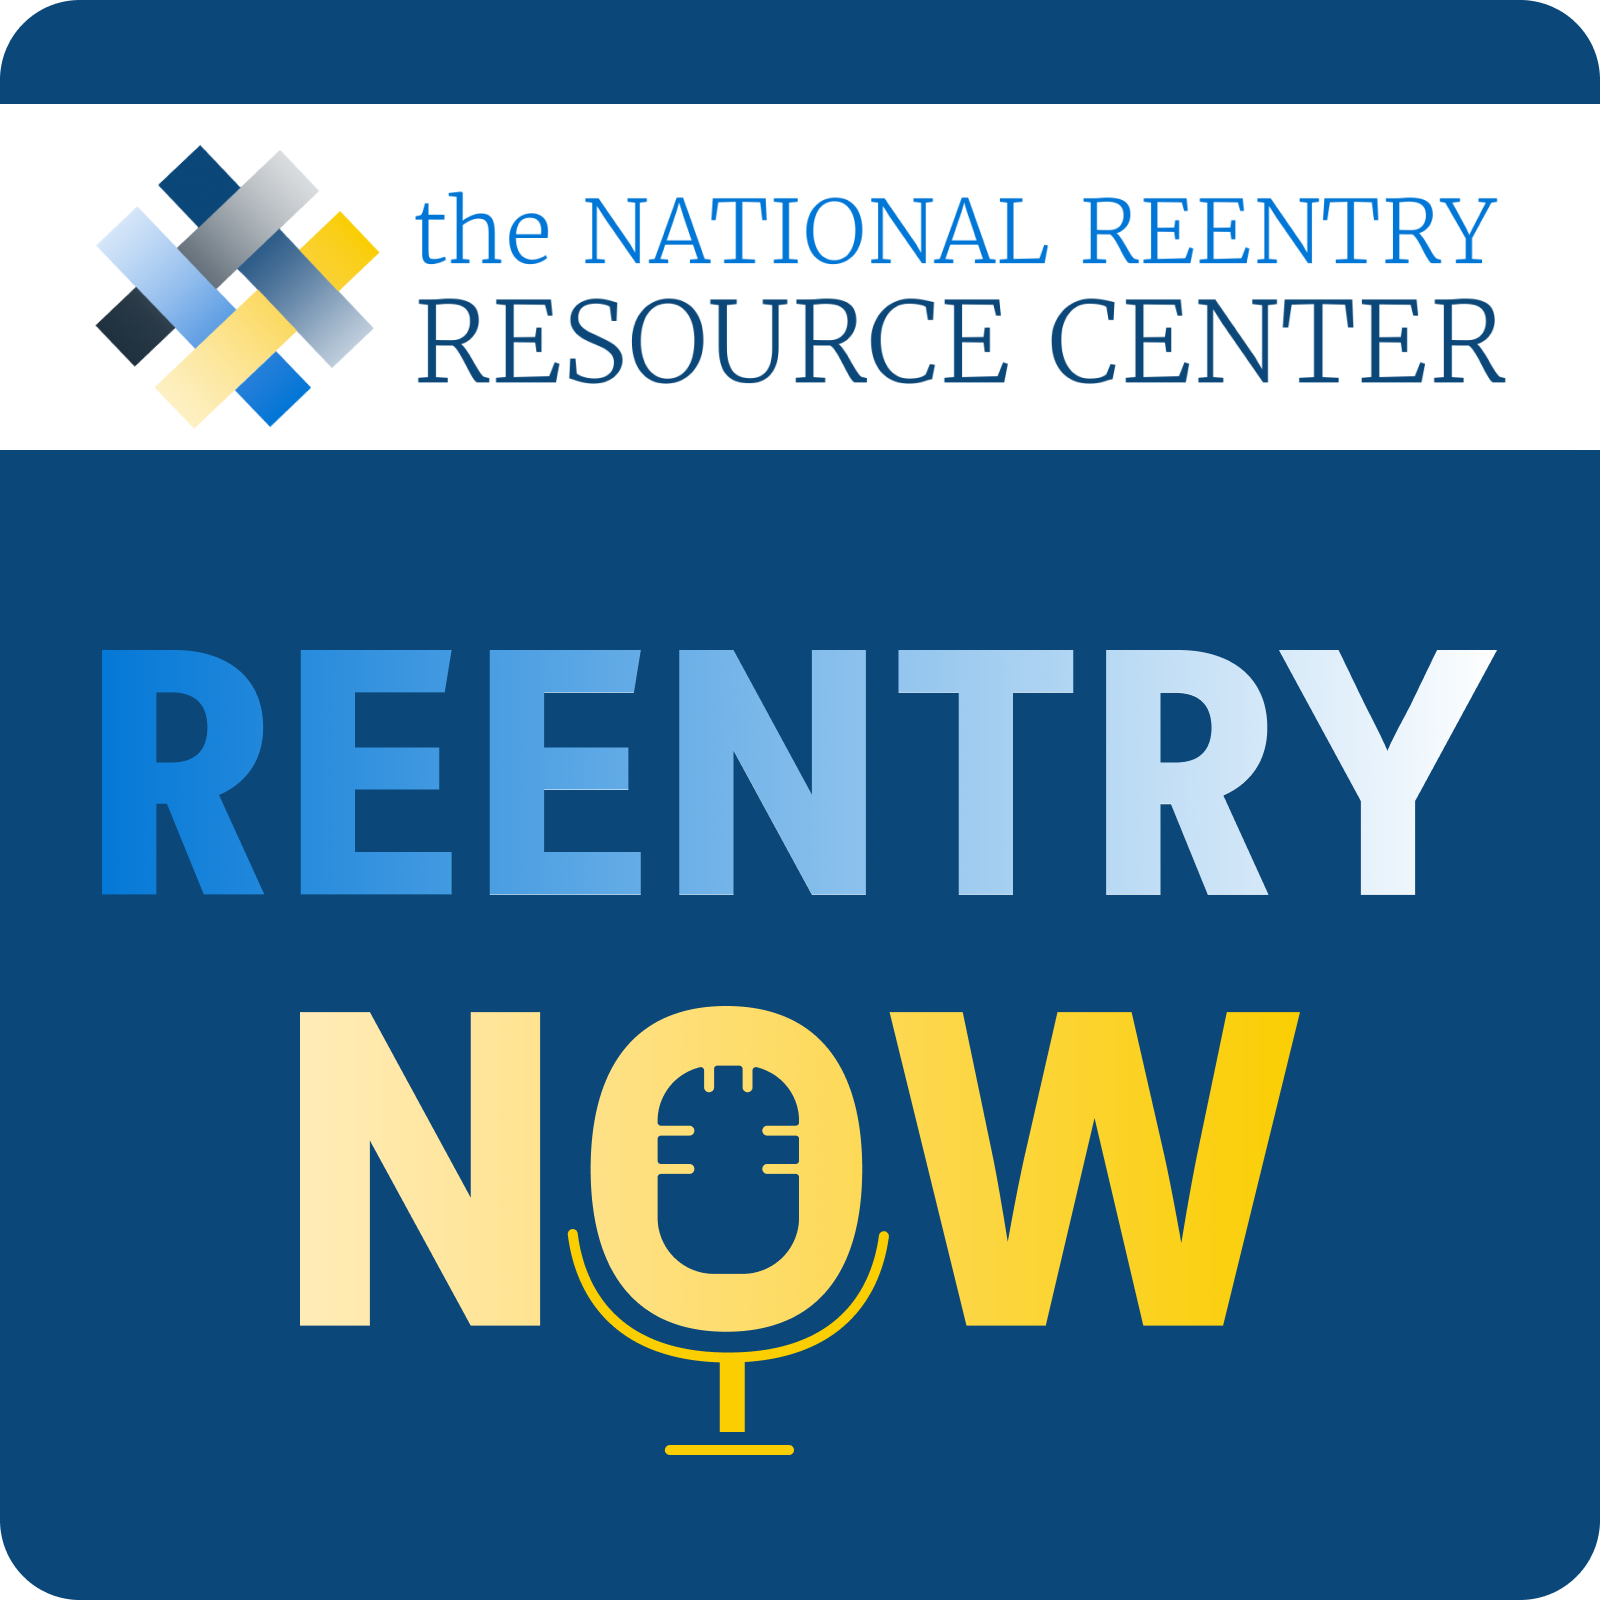 The National Reentry Resource Center Reentry Now